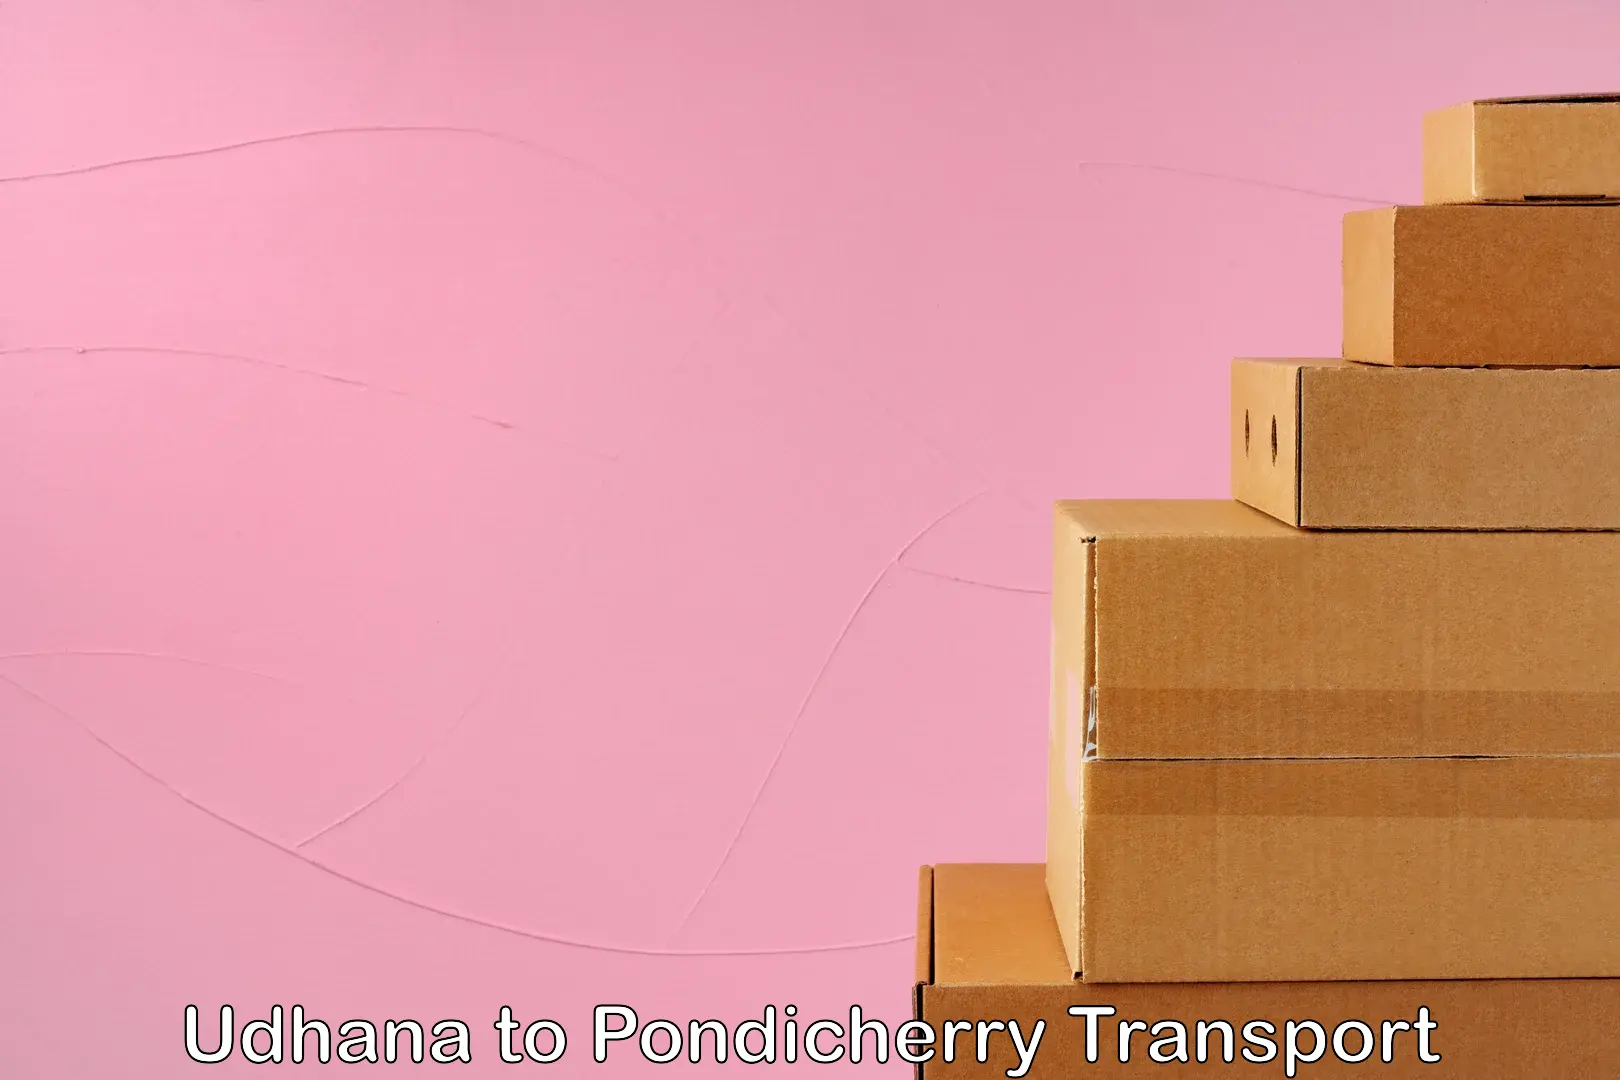 Goods delivery service Udhana to Pondicherry